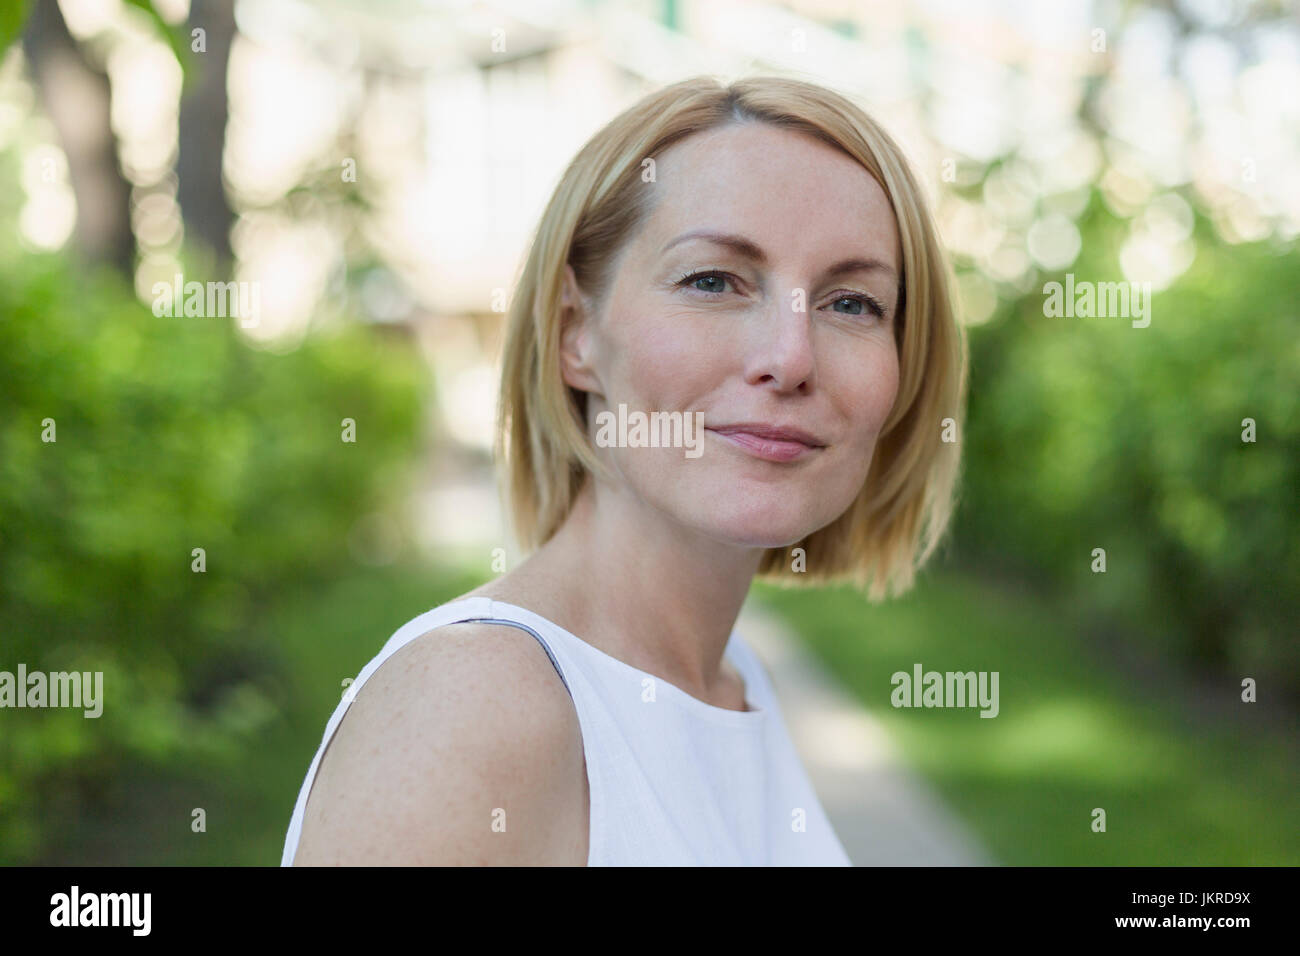 Close-up portrait of confident smiling mature woman with short blond hair at park Stock Photo